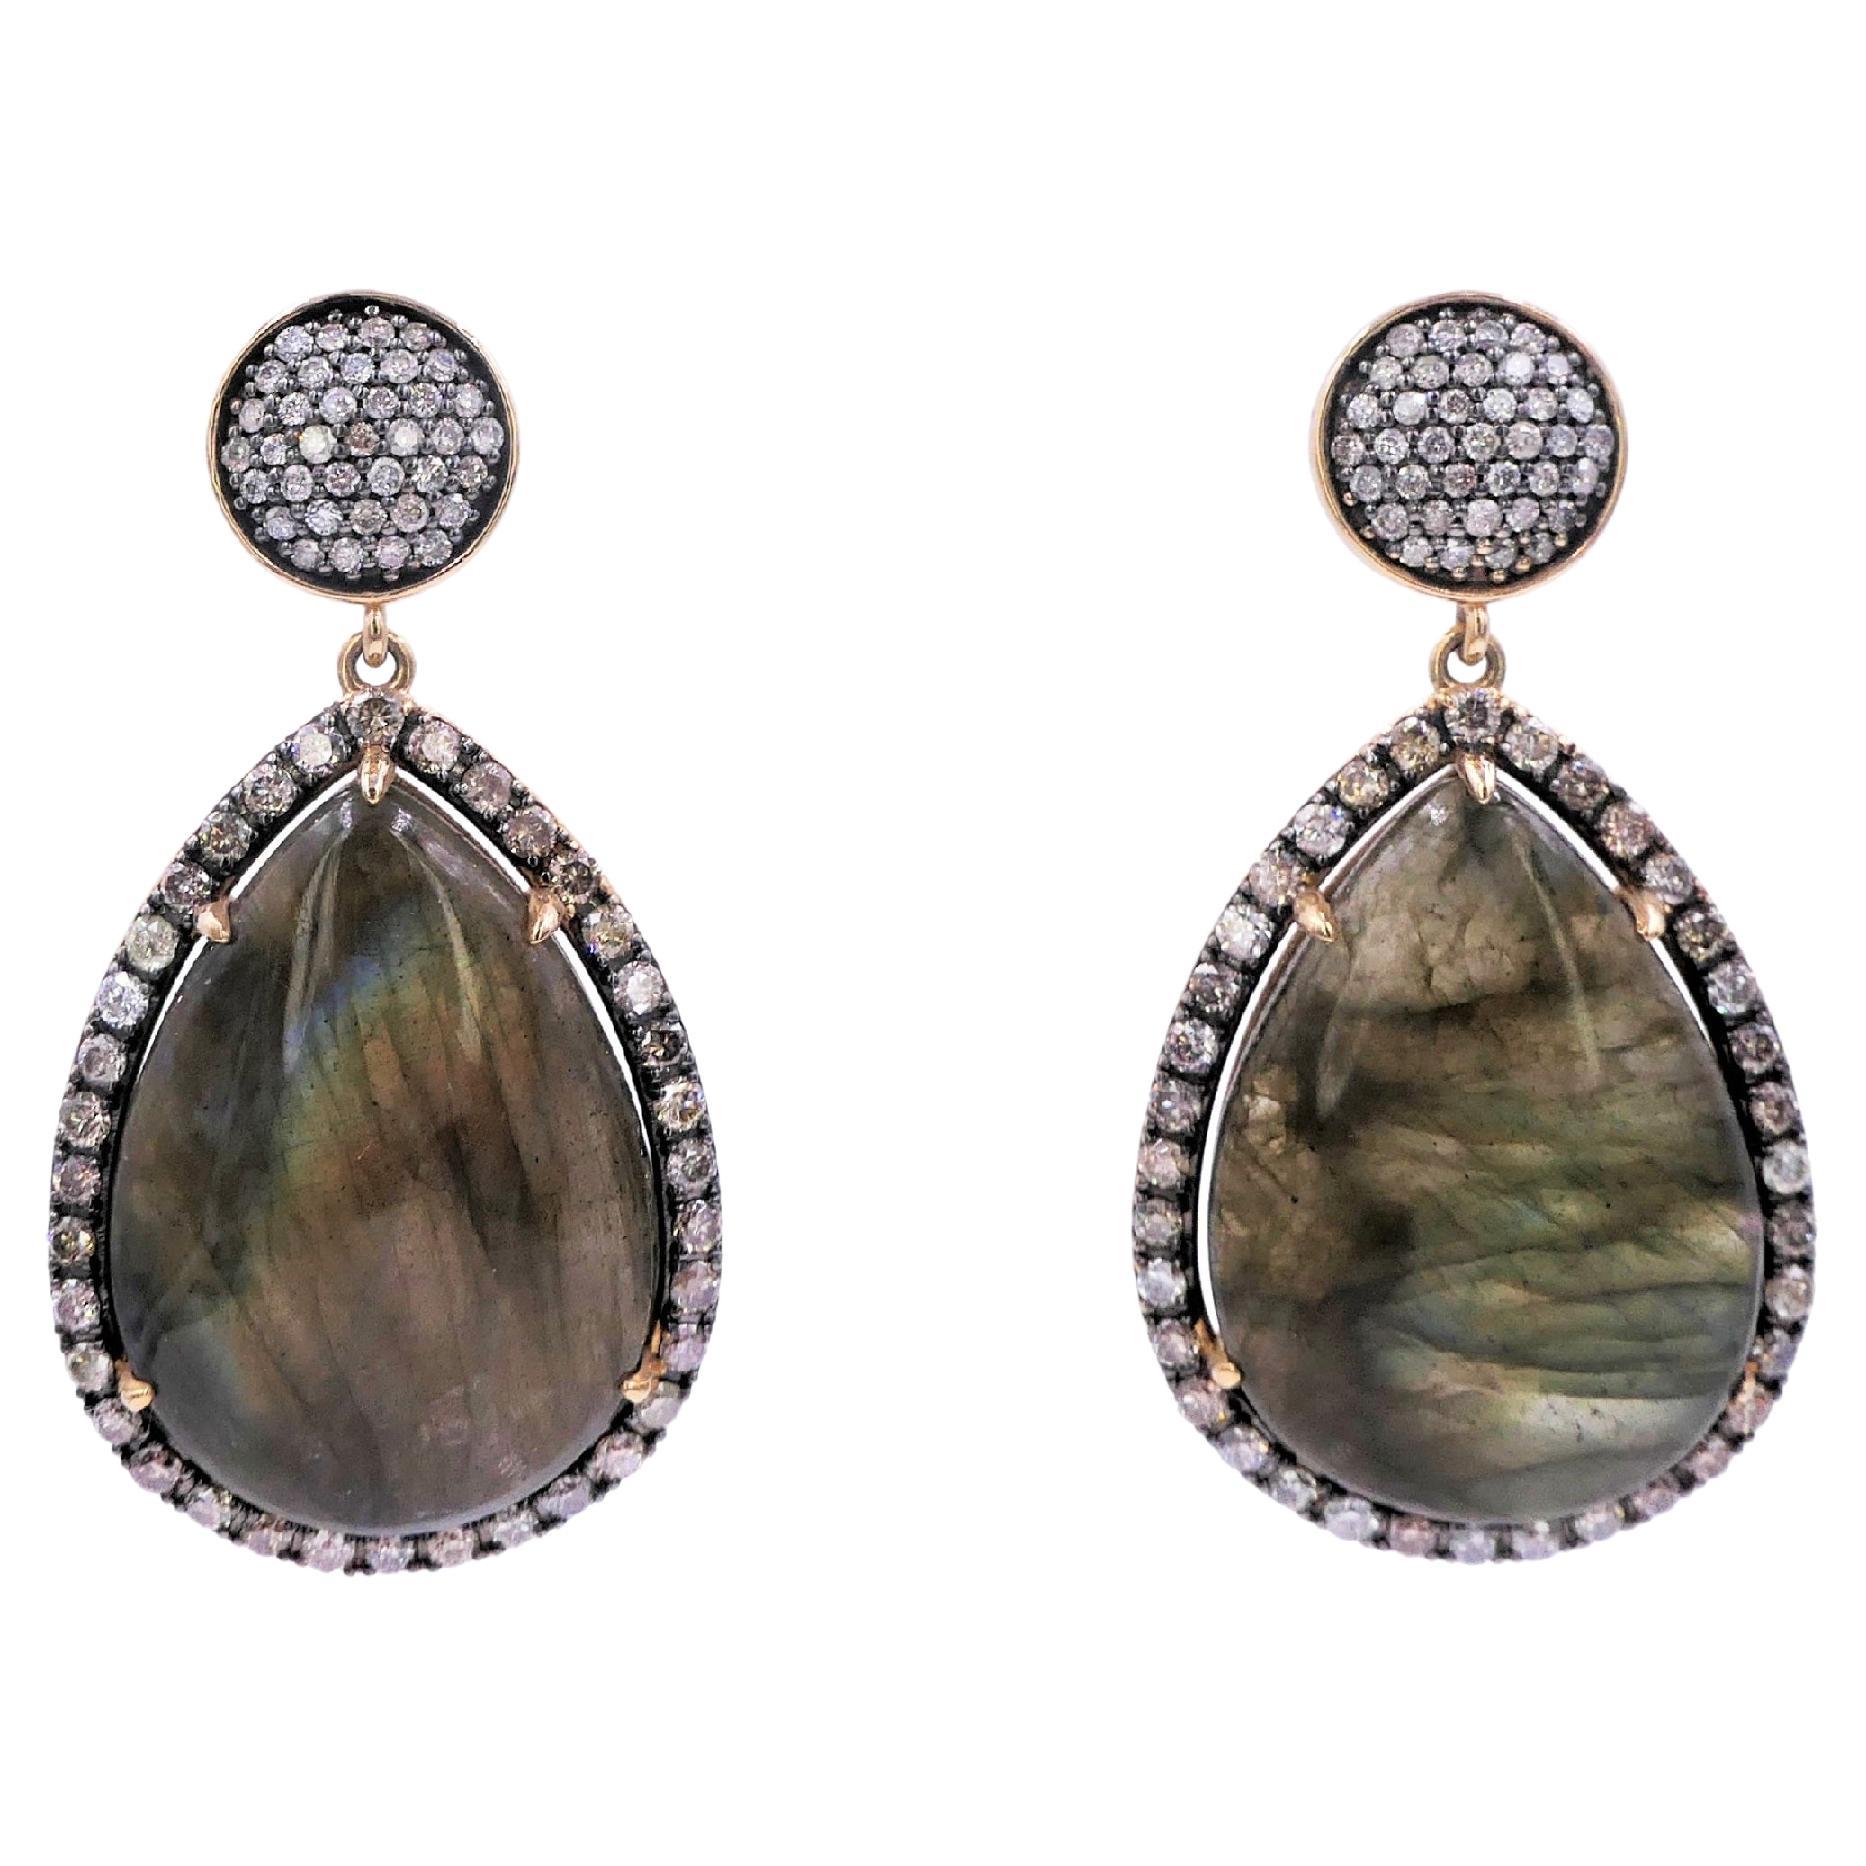 Labradorite Pear Drop Shape Grey Silver Diamonds Halo Drop 14K Gold Earrings
14 Karat Yellow Gold
2.00 CT Diamonds
Labradorite Pear Shape Cabochon Gemstones

Important Information:
Please note that this item will take 2-4 weeks to deliver - it is